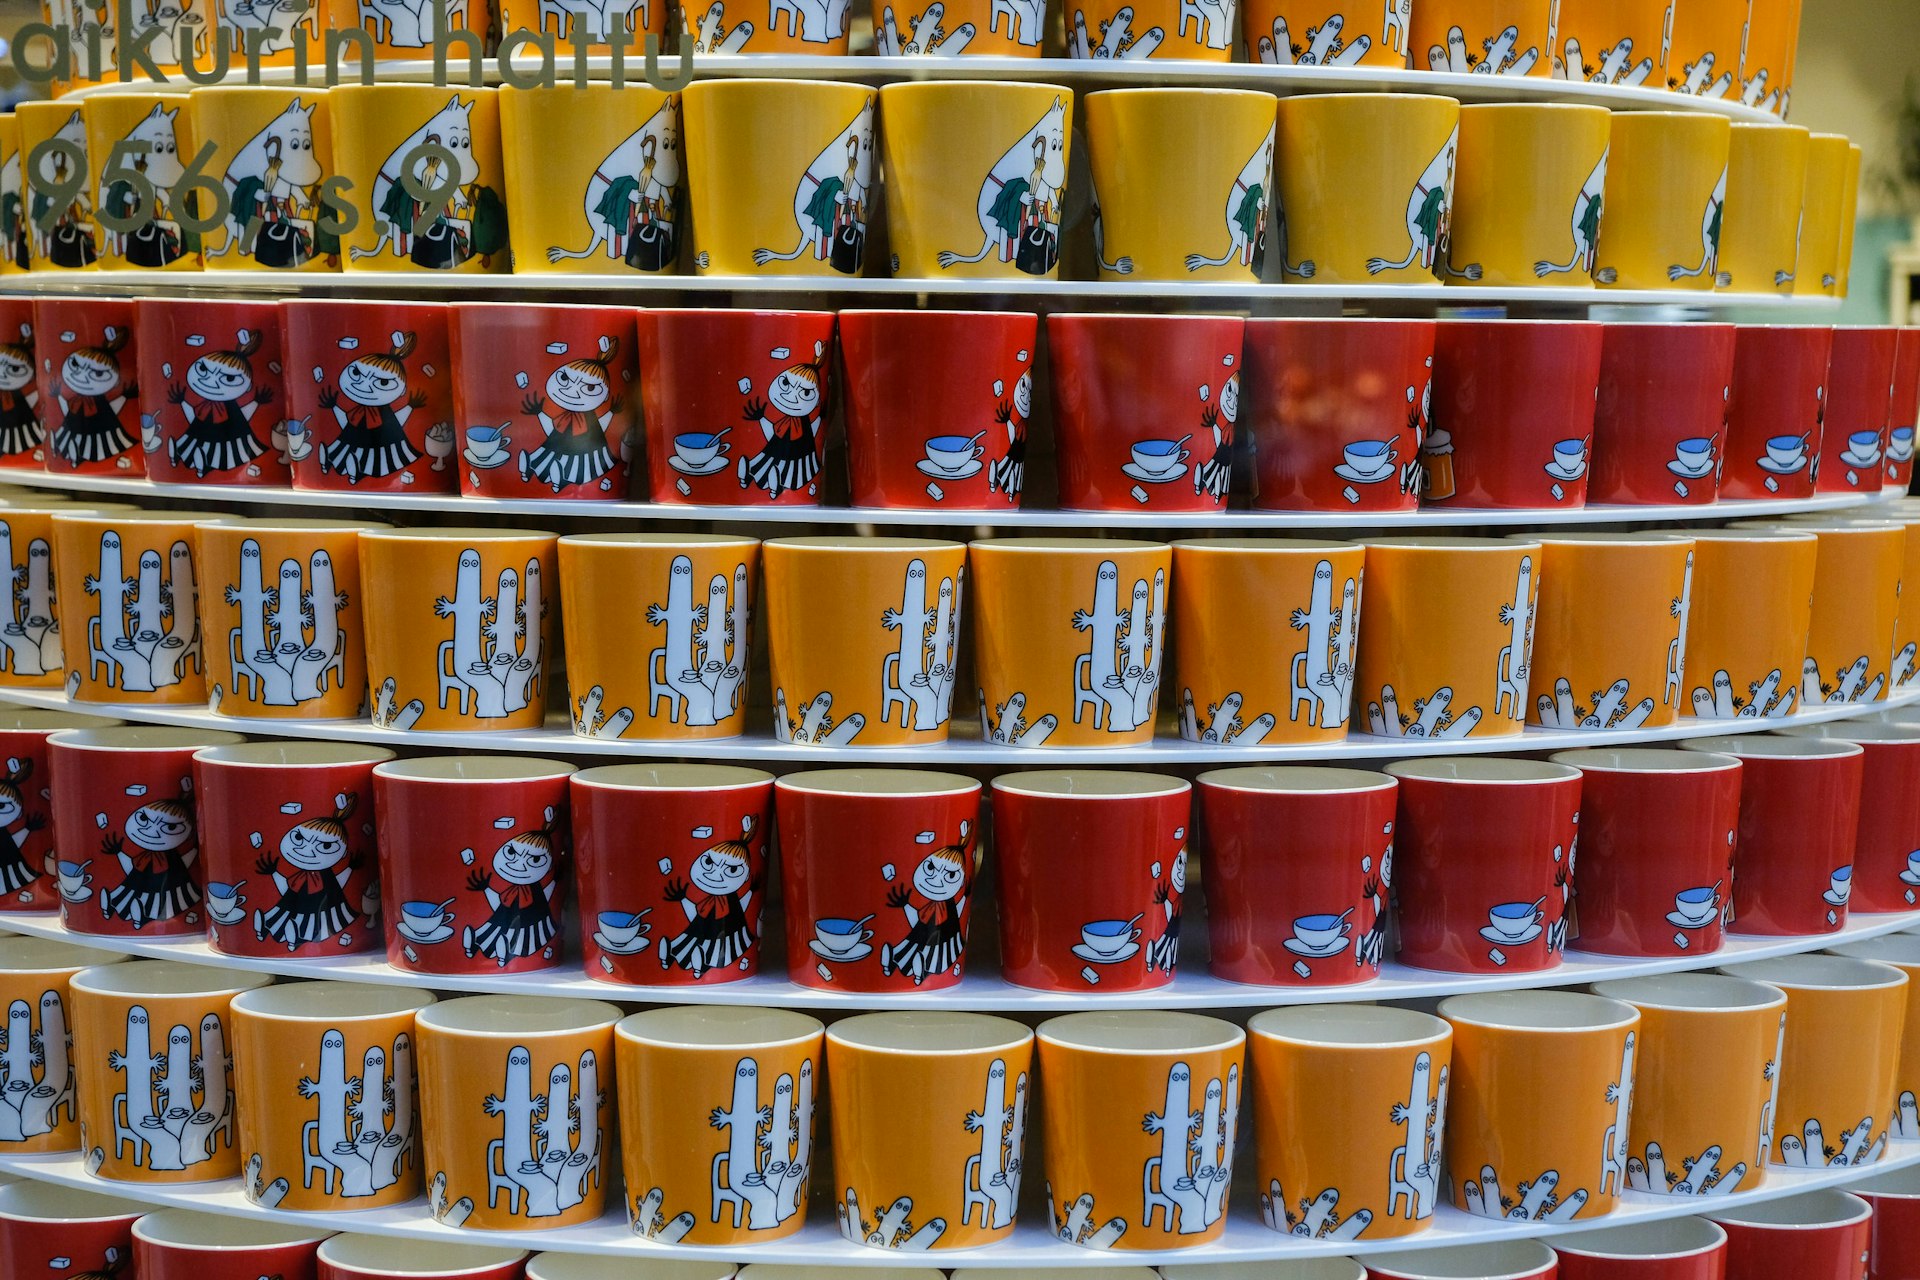 A display of Moomin–print mugs, layered in tiers © Tim Bird / Lonely Planet